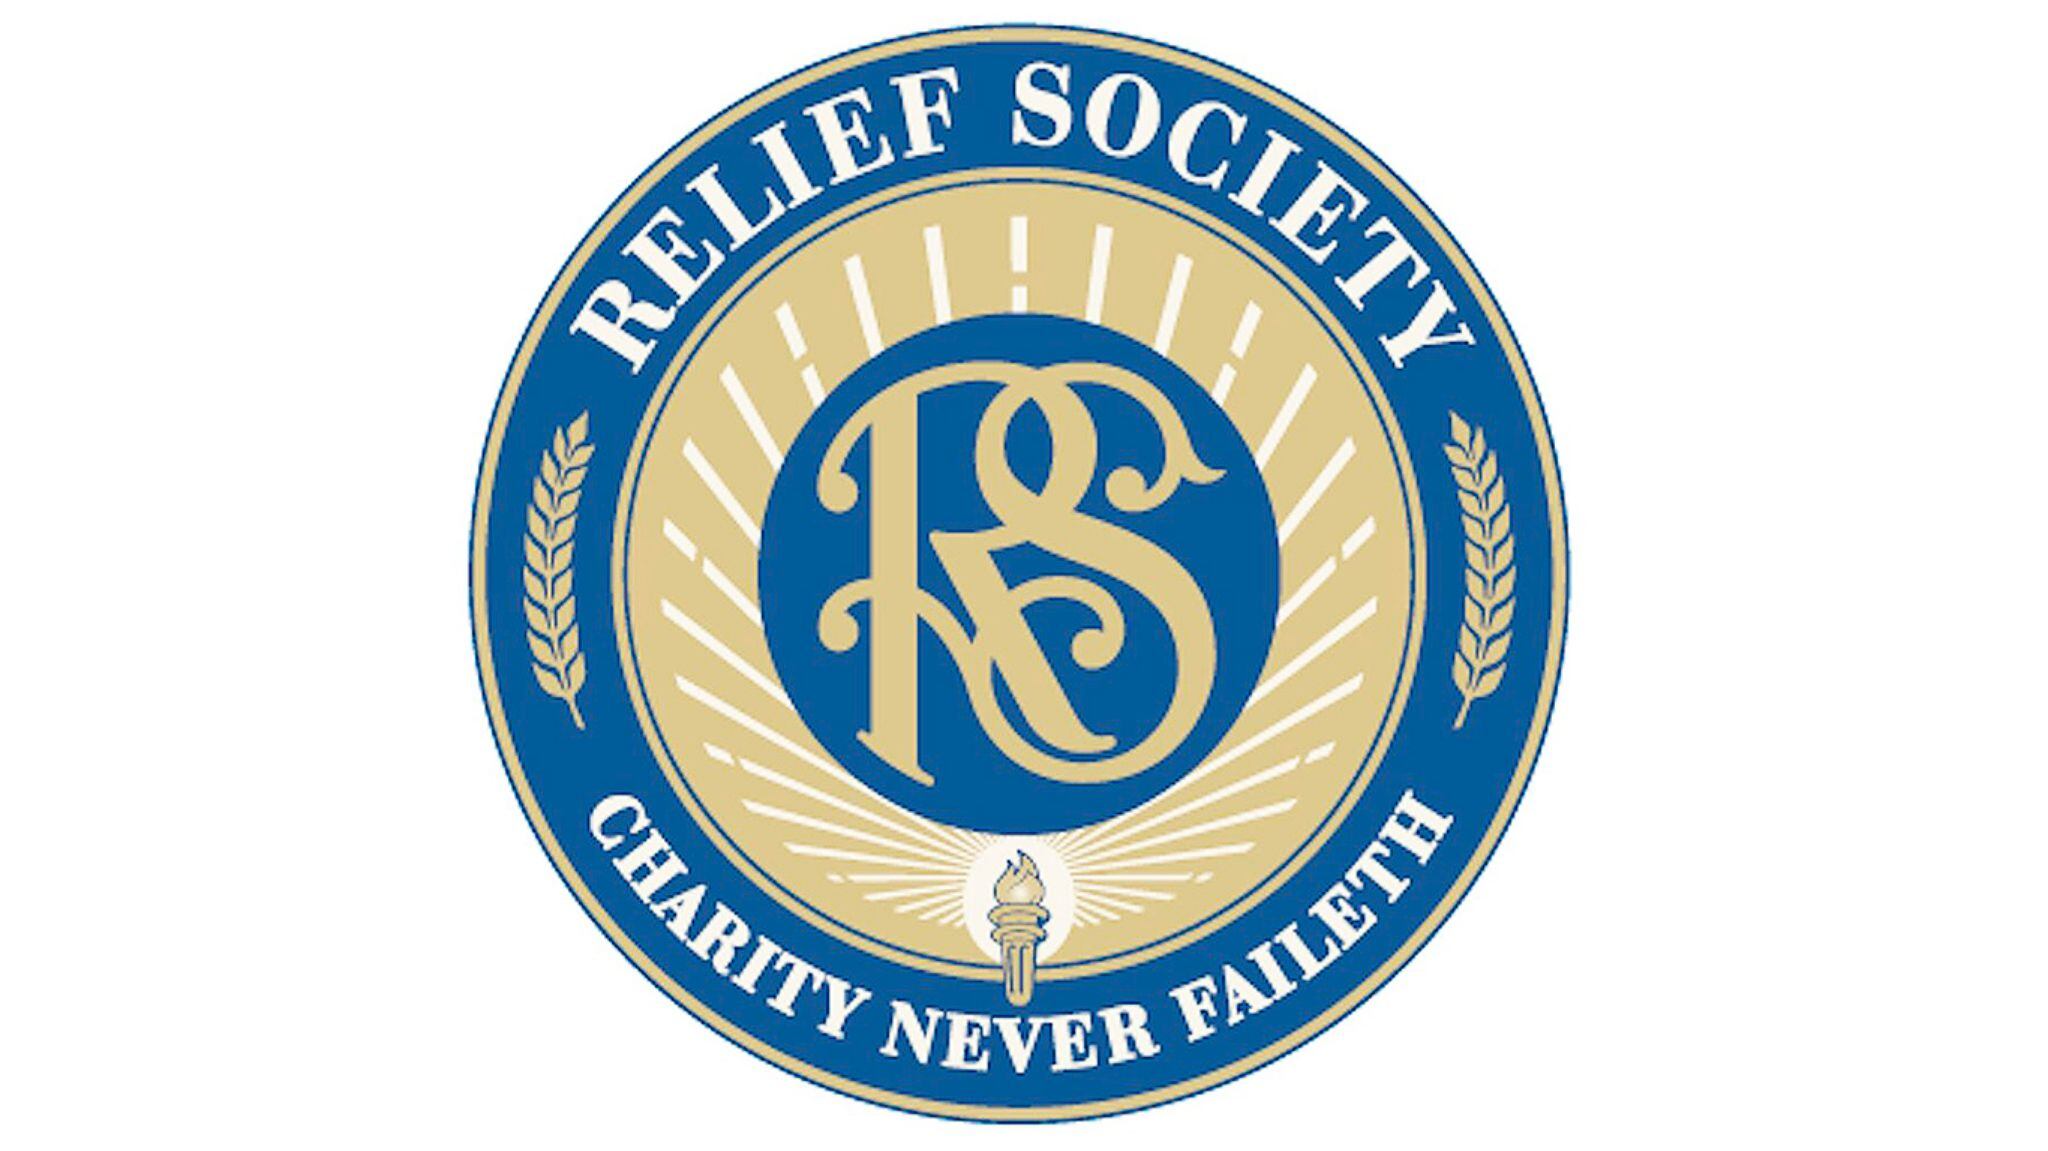 (The Church of Jesus Christ of Latter-day Saints) The women's Relief Society logo displays the organization's motto, Charity Never Faileth. Inouye would like to see the Relief Society lead the way on humanitarian outreach.